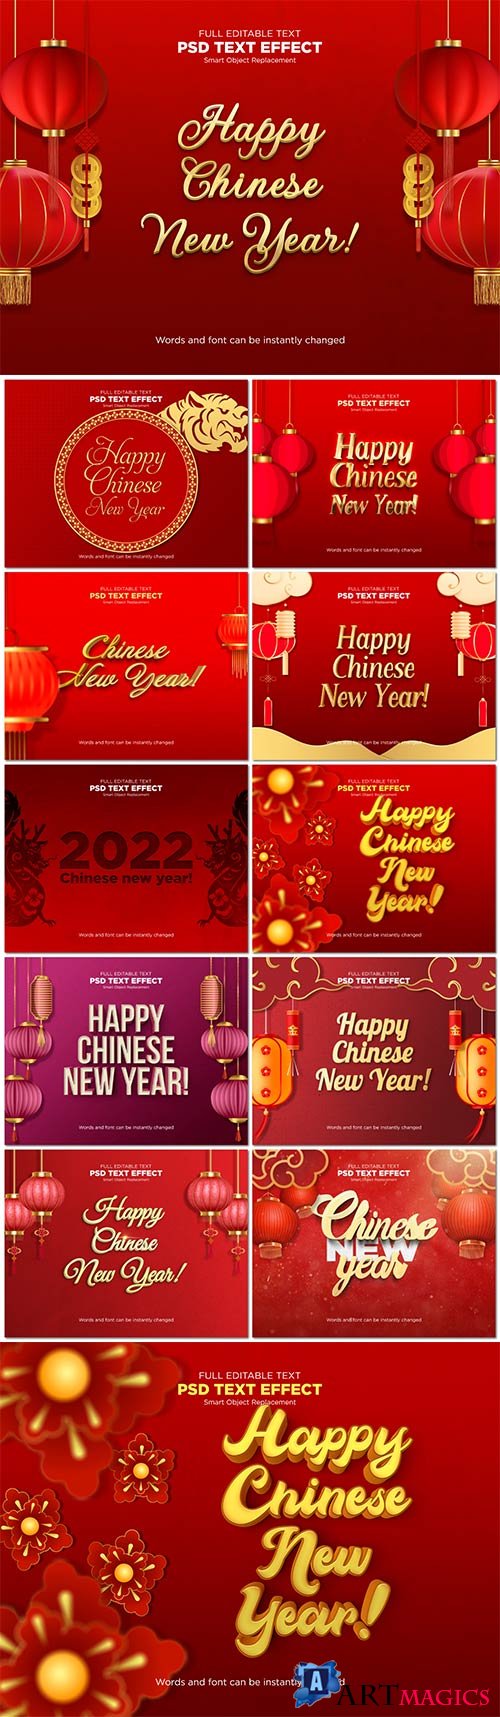 Chinese 2022 new year text effect psd